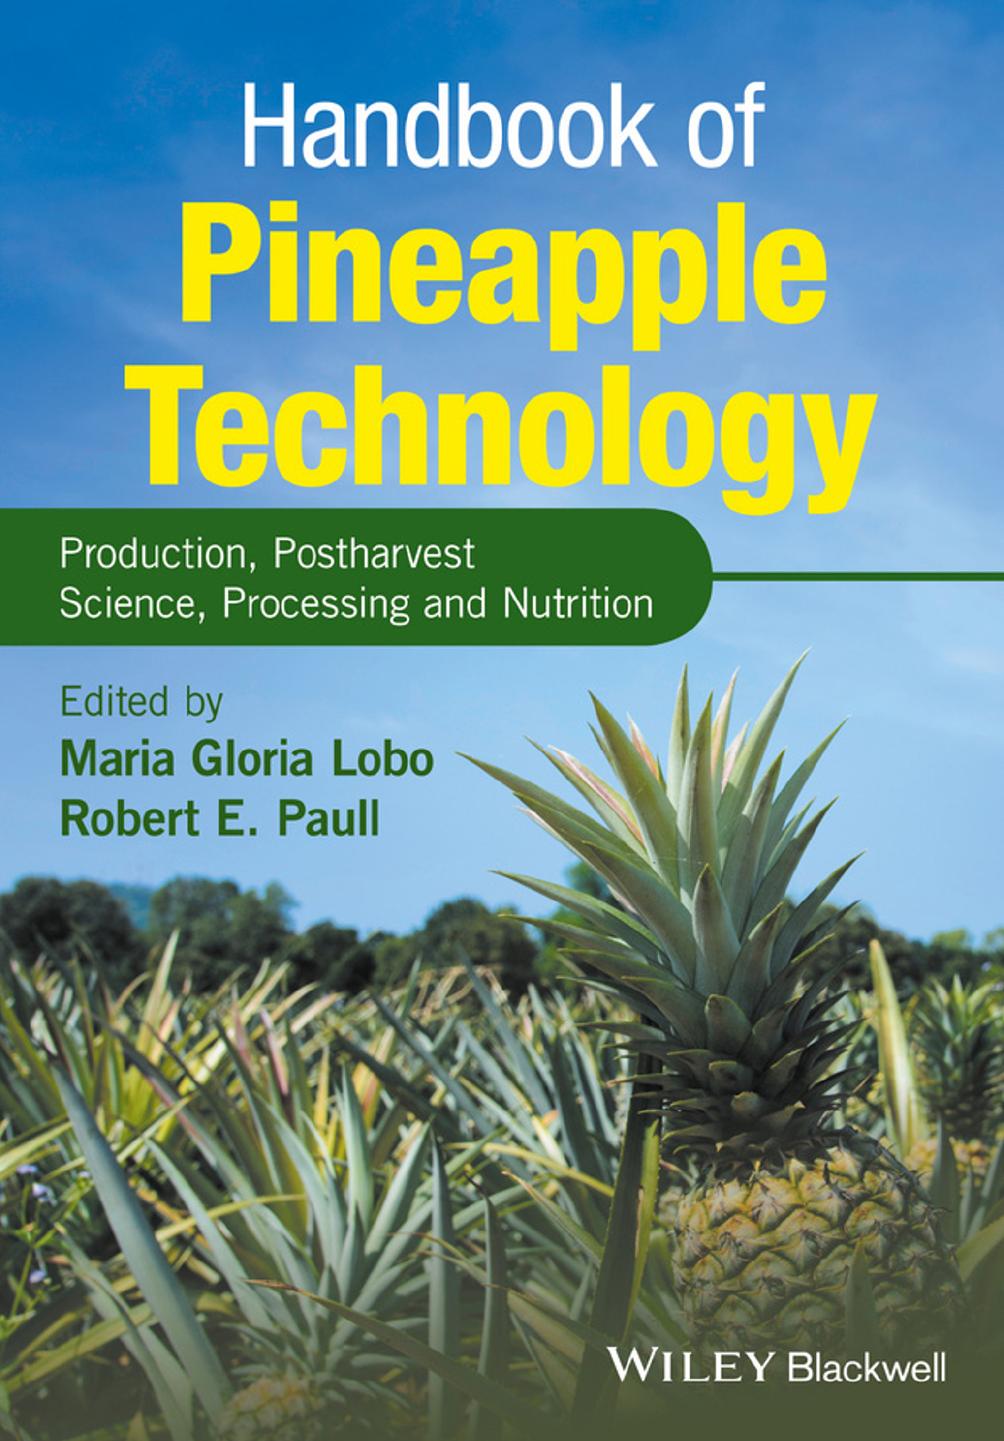 Handbook of Pineapple Technology: Production, Postharvest Science, Processing and Nutrition